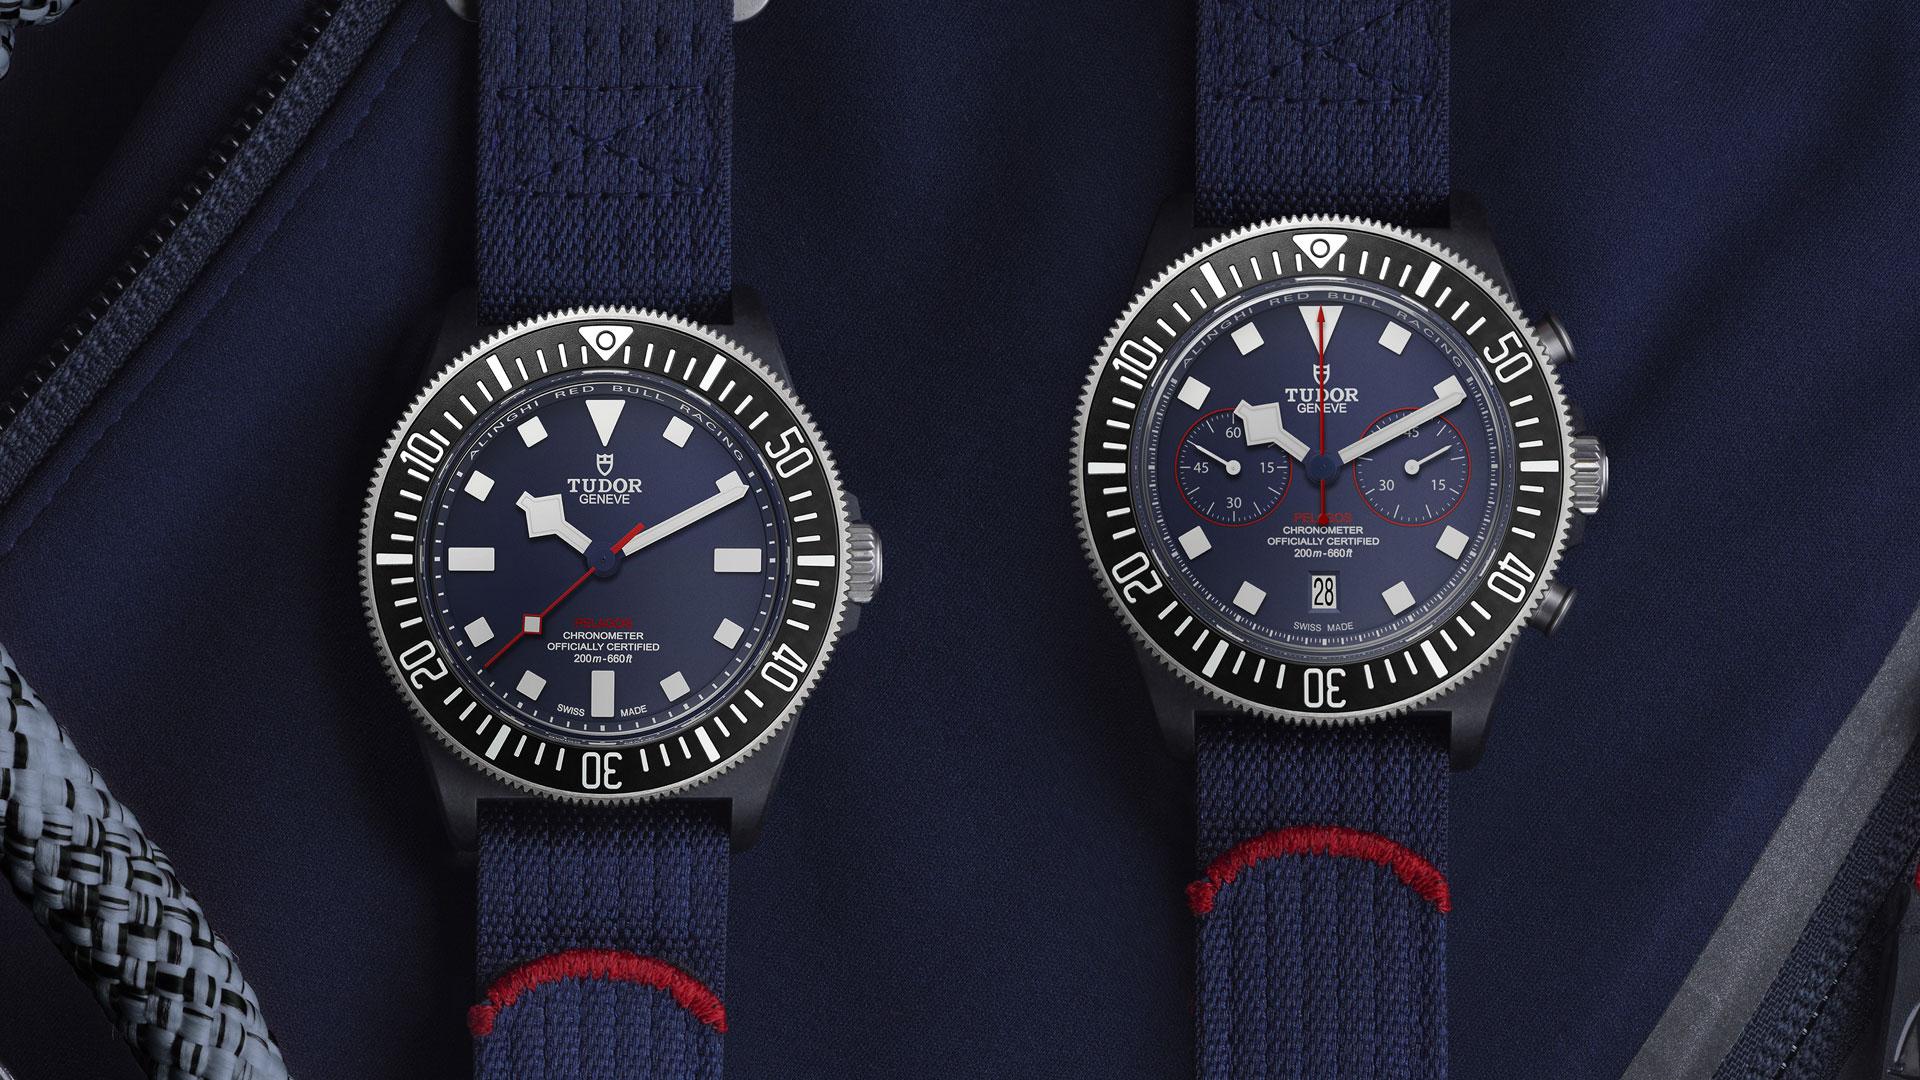 Tudor Pelagos FXD Alinghi Red Bull Racing Edition ref. 25707KN with the chronograph model on the right